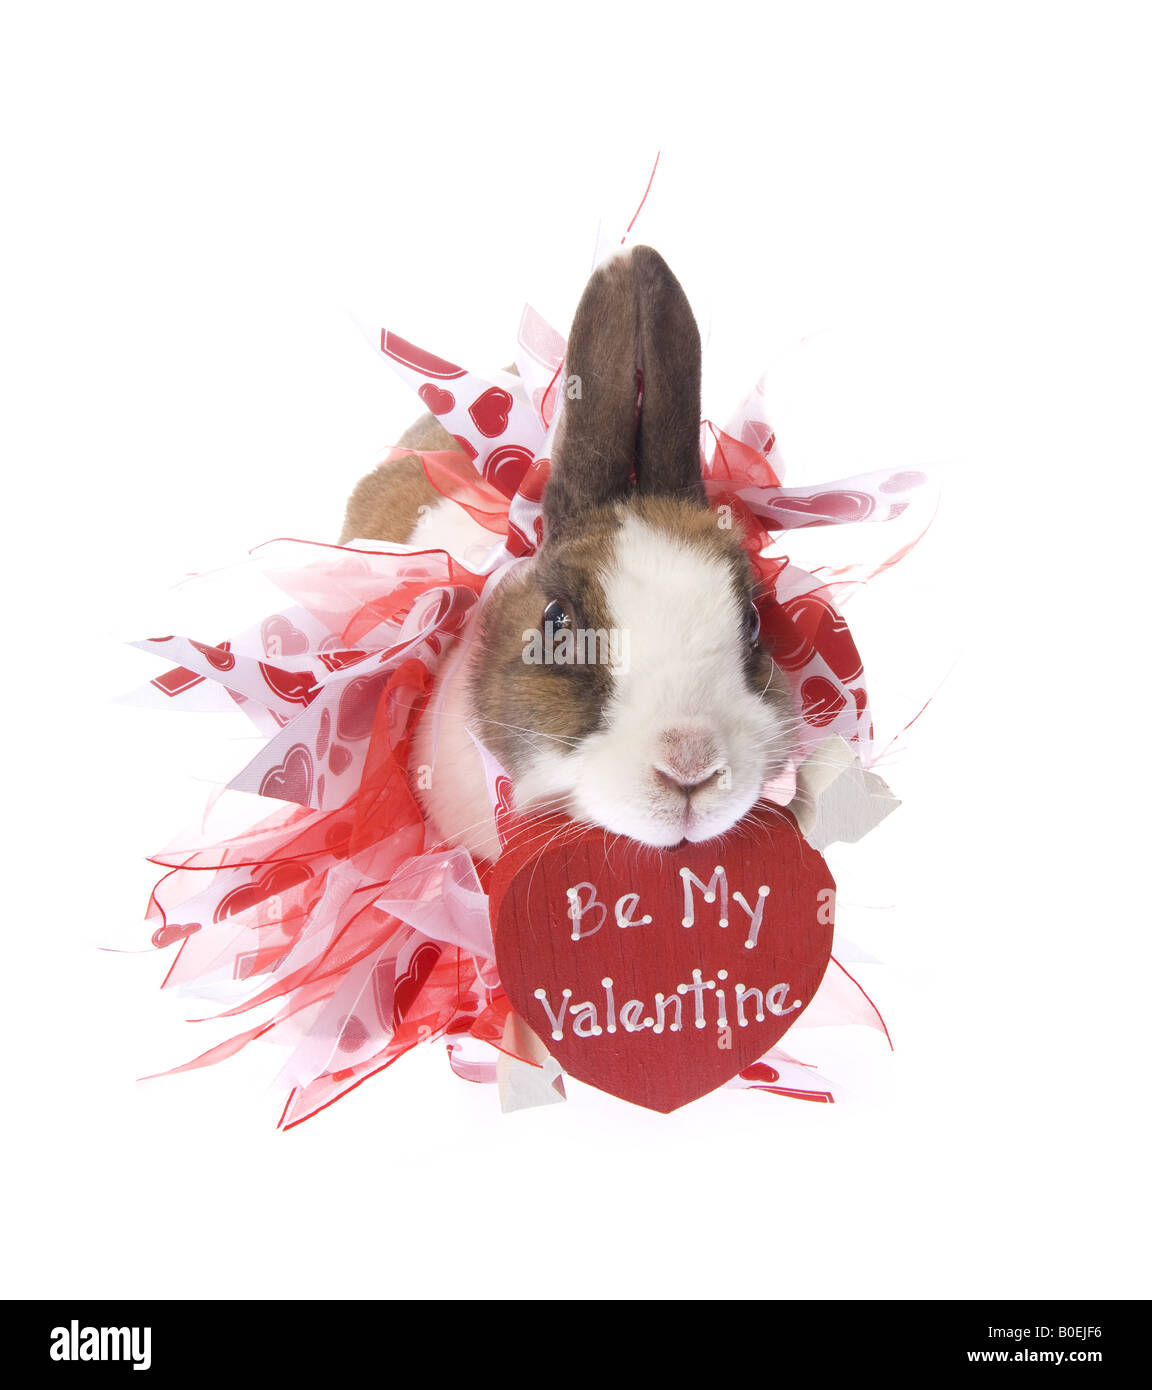 Valentines Day Dutch bunny rabbit with red heart that says Be My Valentine isolated on white background Stock Photo